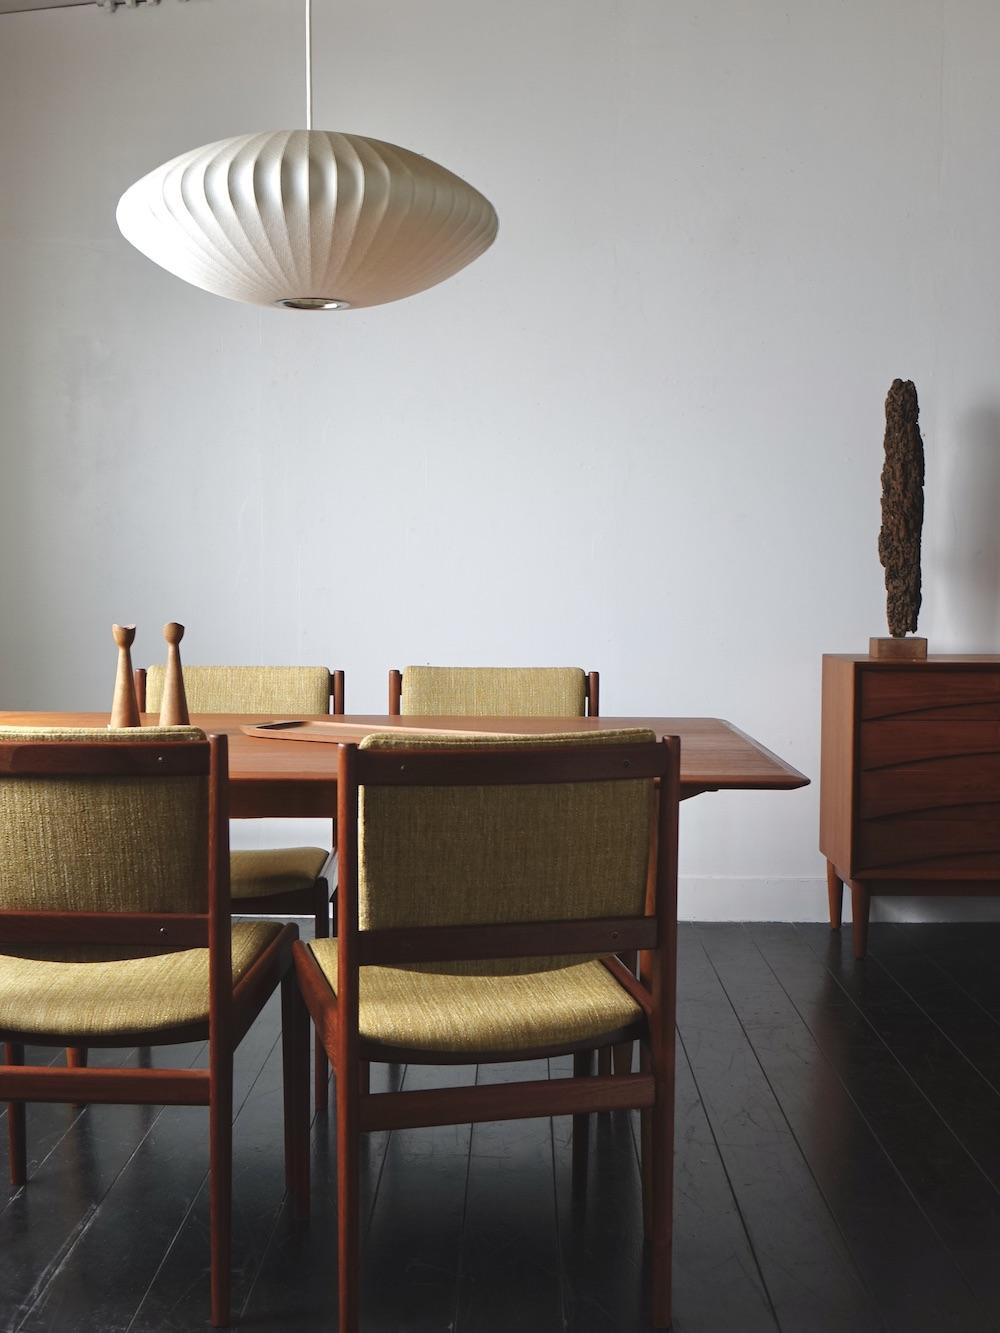 Dining chairs by Karl Erik Ekselius for J.O. Carlsson